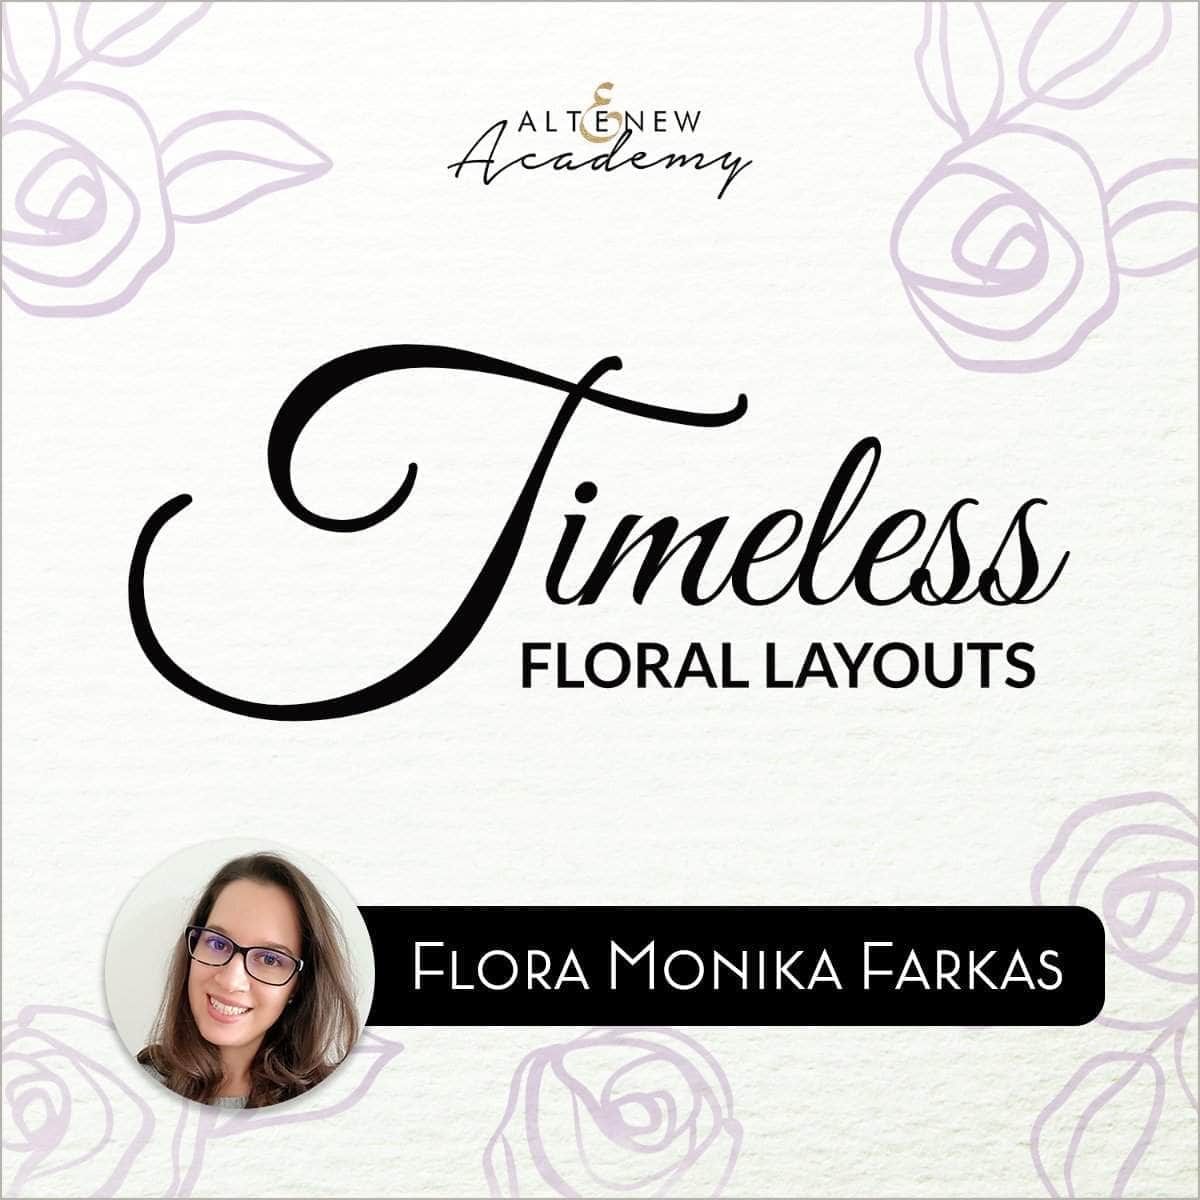 Altenew Class Timeless Floral Layouts Online Cardmaking Class